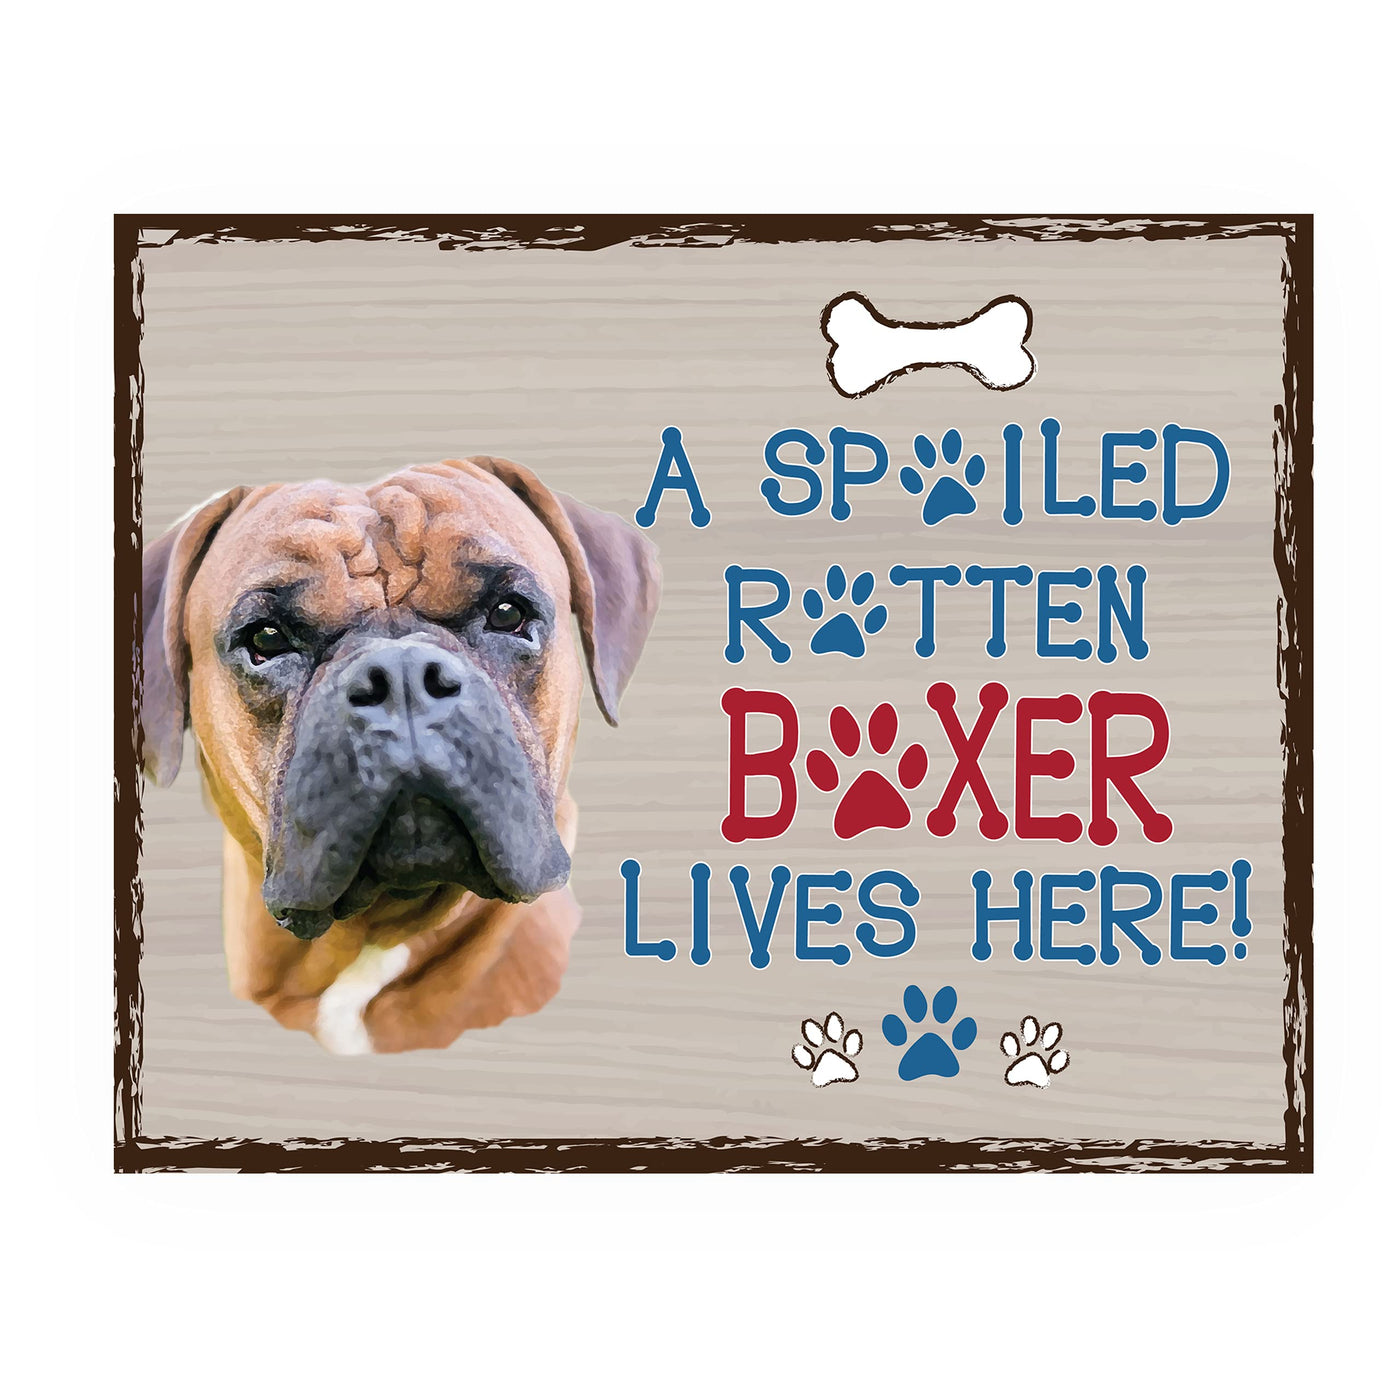 Boxer-Dog Poster Print- 10 x 8" Wall Decor Sign-Ready To Frame."A Spoiled Rotten Boxer Lives Here". Perfect Pet Wall Art for Home-Kitchen-Cave-Bar-Garage. Great Gift for All Brindle Boxer Lovers.